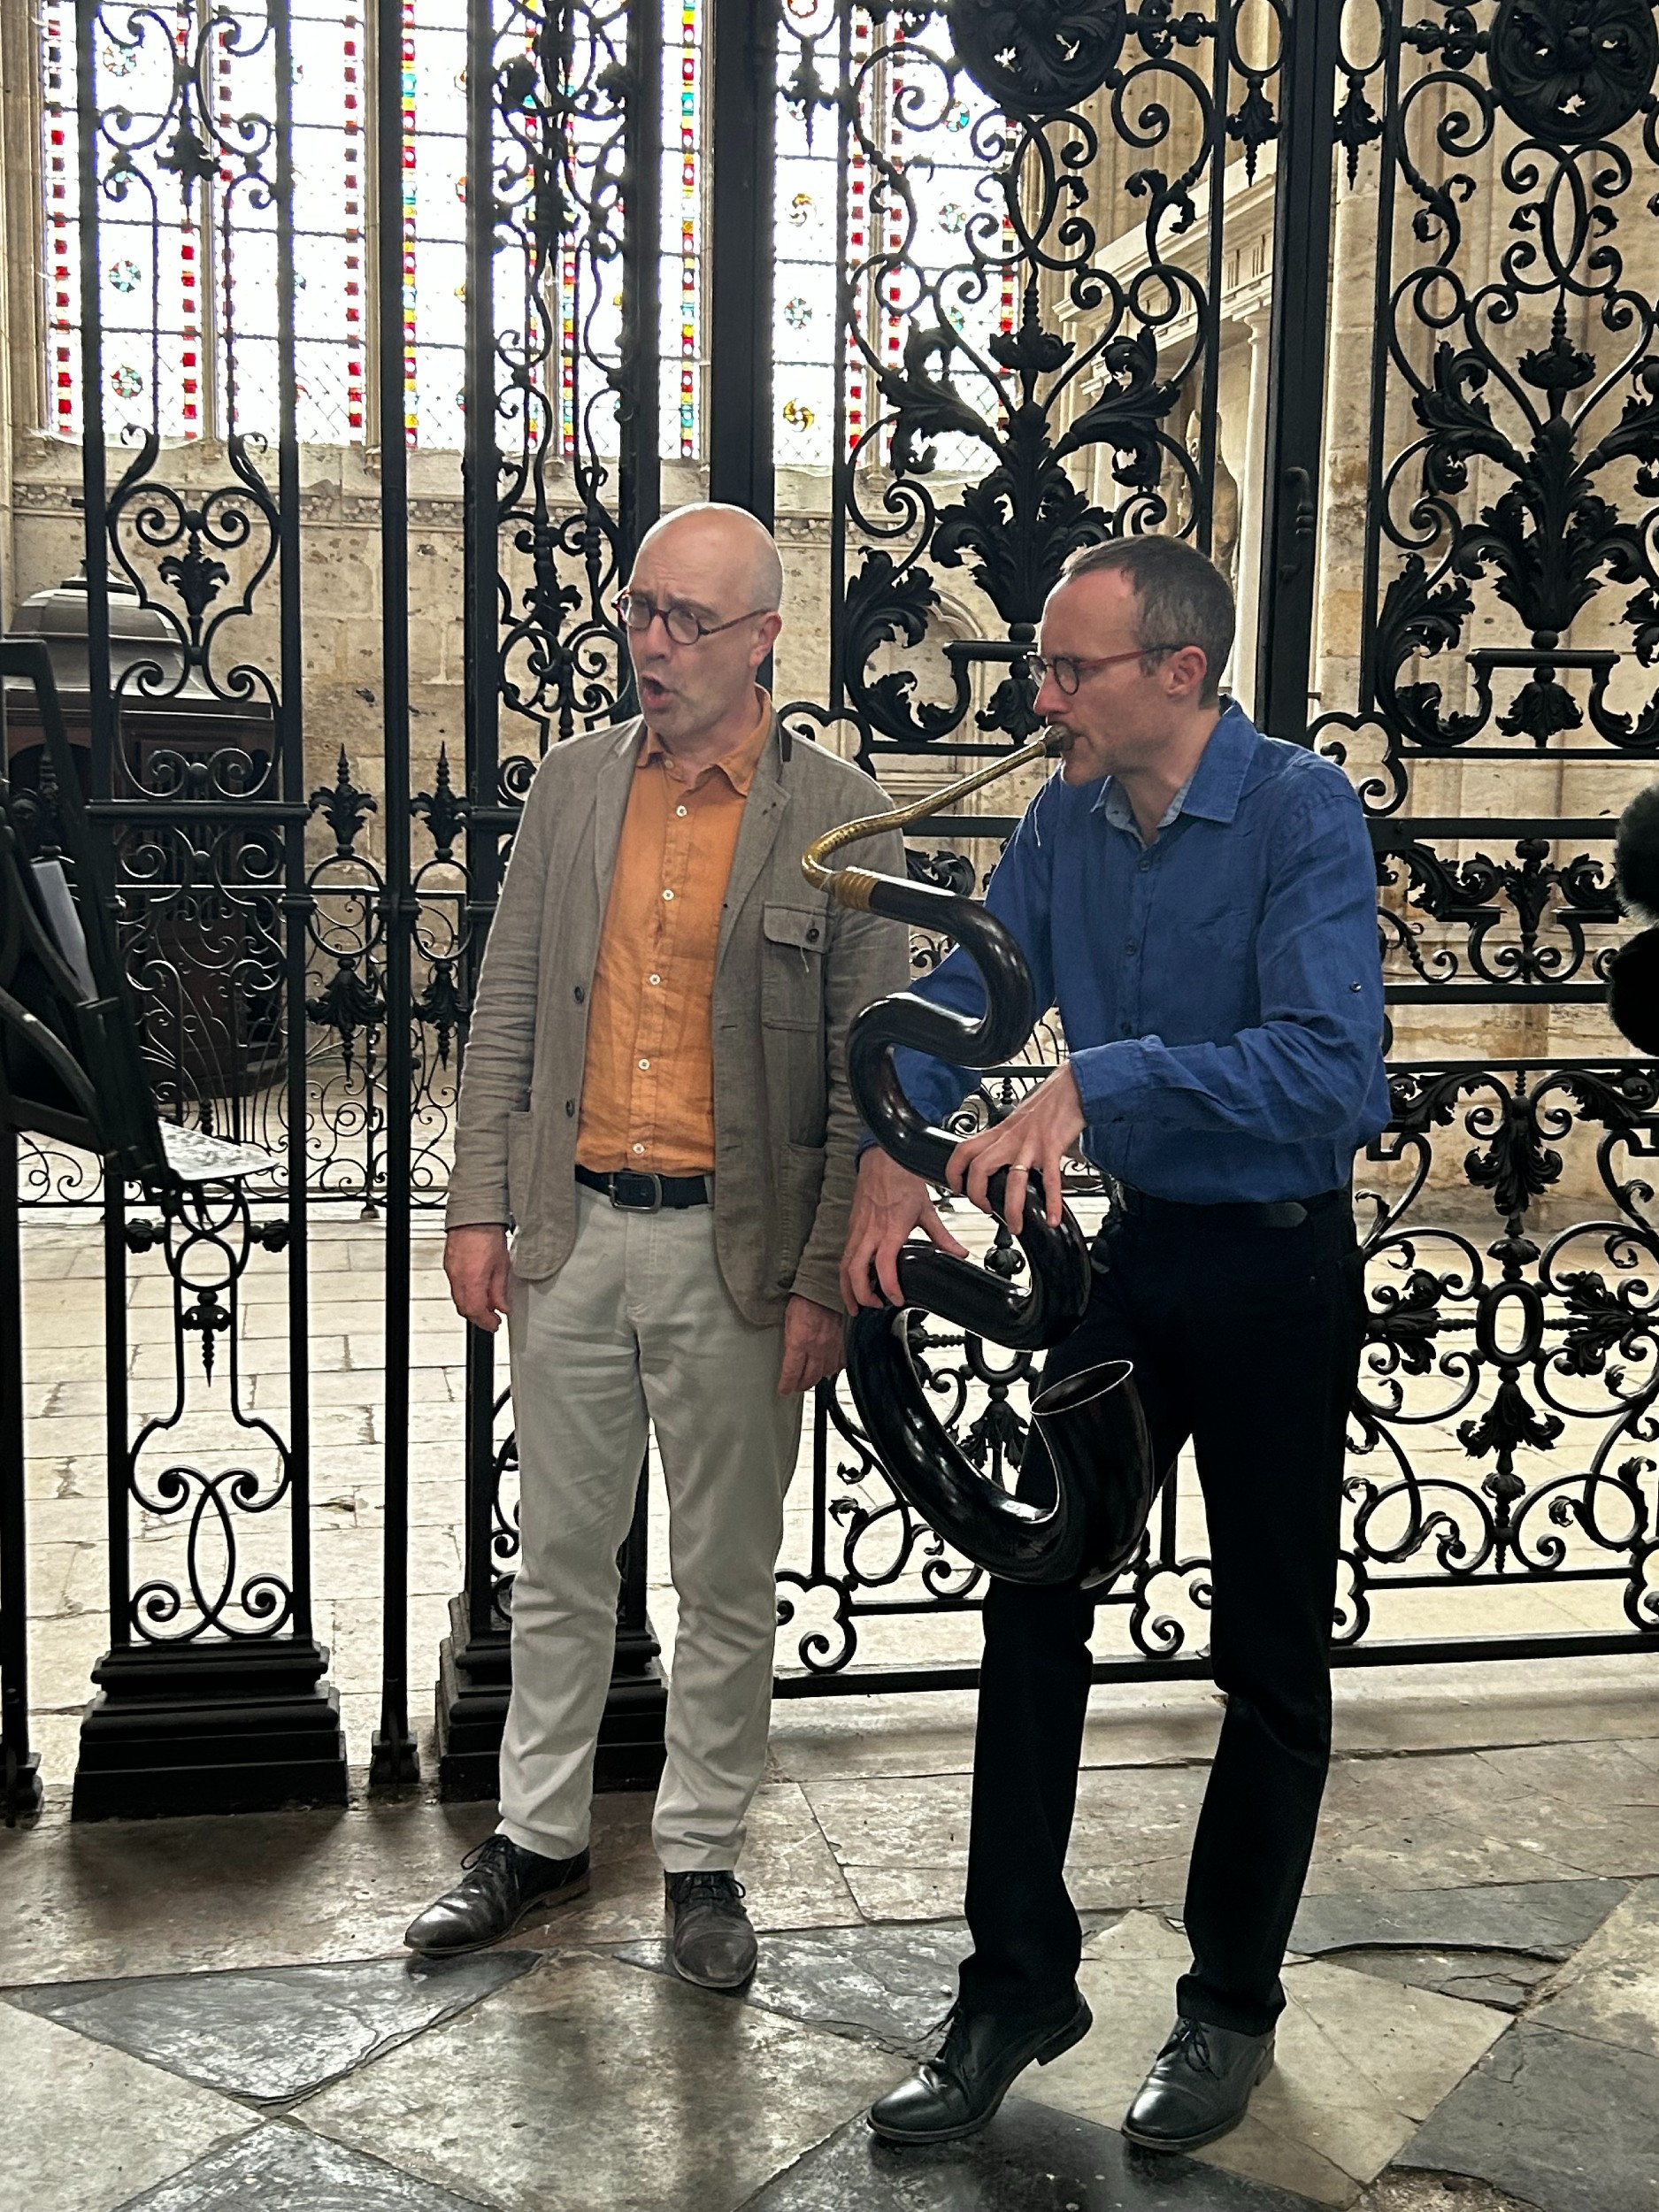 singer and serpent player in front of interior metal gates of a cathedral